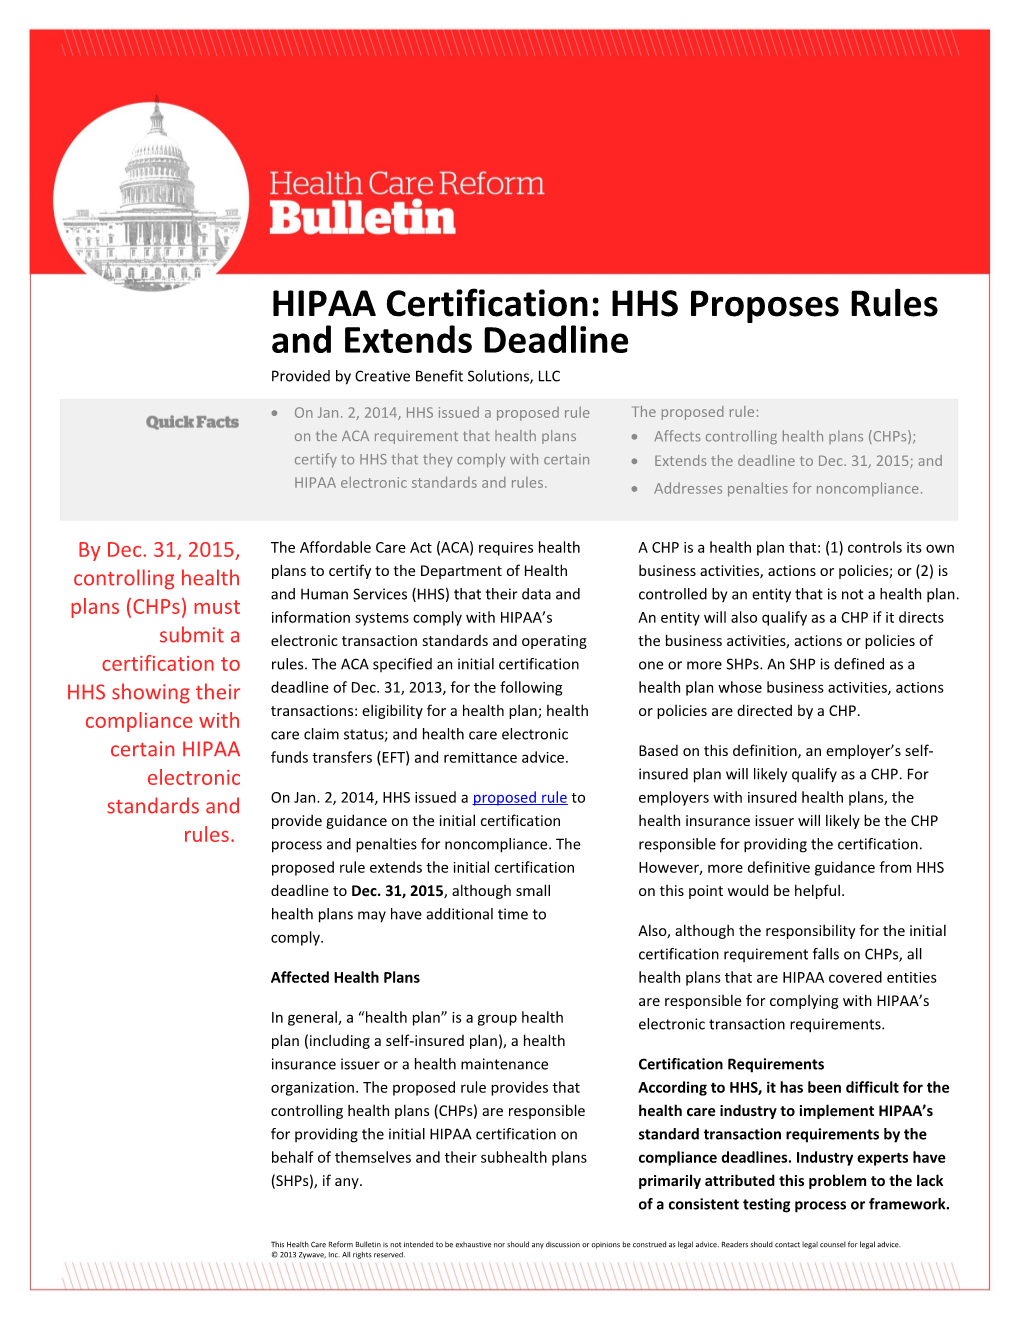 HIPAA Certification: HHS Proposes Rules and Extends Deadline